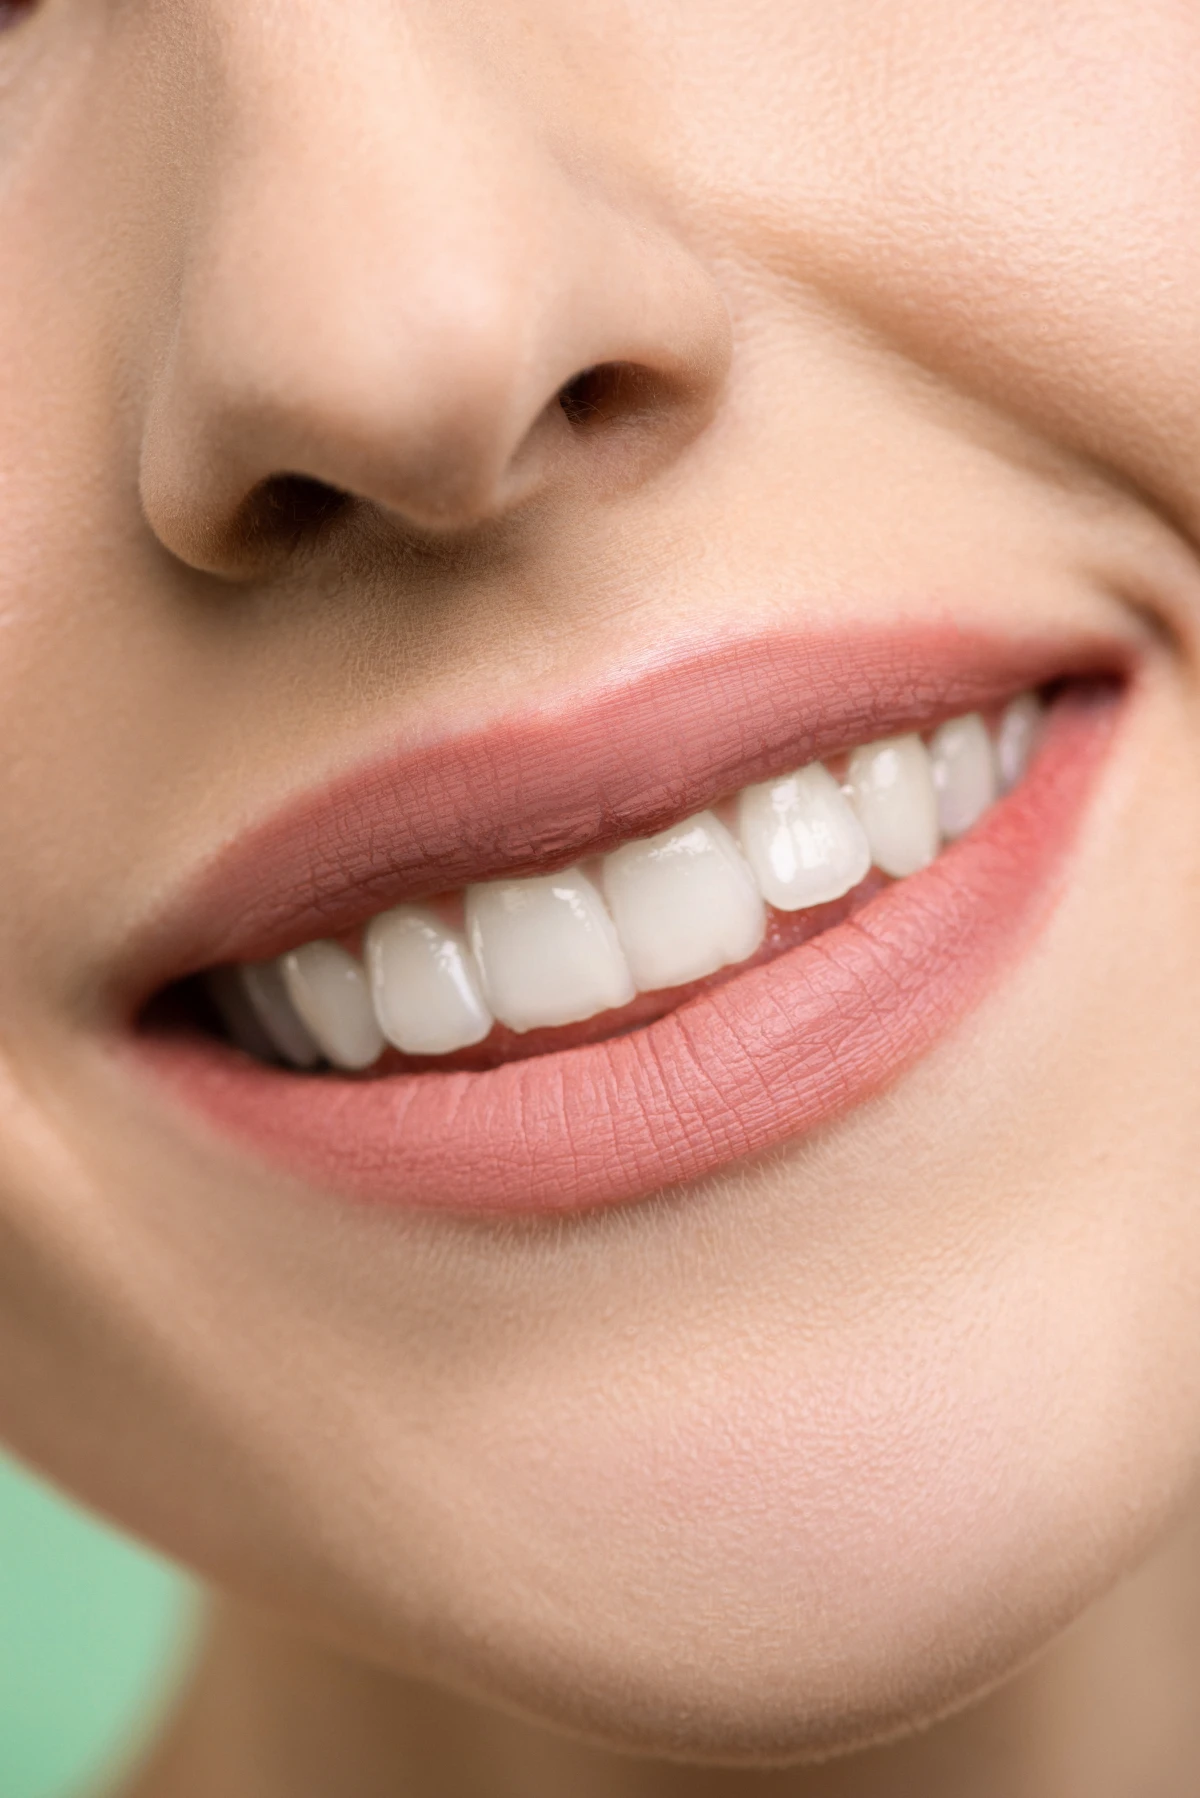 bentonite clay benefits woman smiling with white teeth